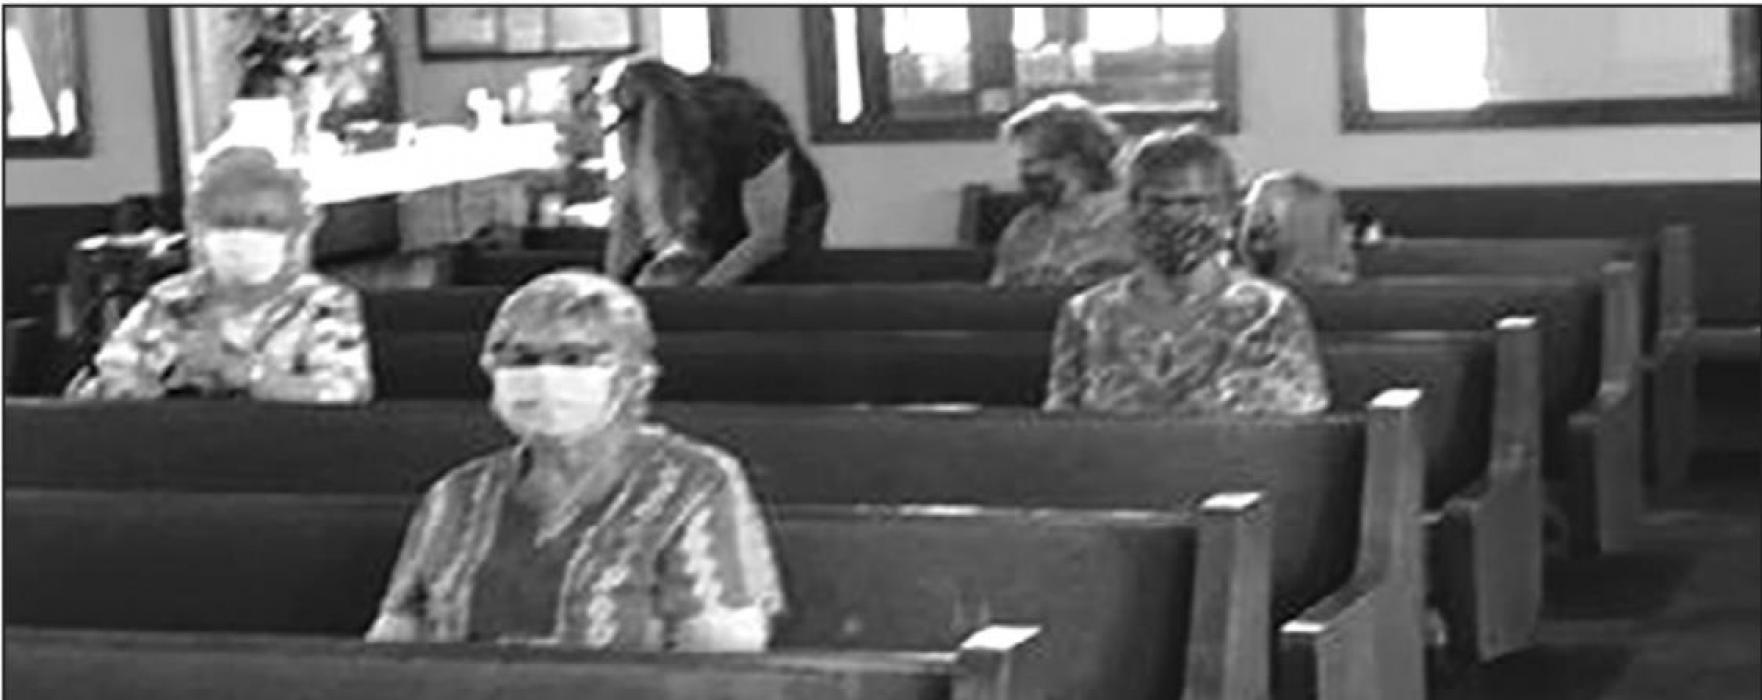 Pictured are some of the worshippers at Faith Lutheran Church in Weimar practicing social distancing, wearing face masks and involved people from a variety of ages (from young children to persons reaching 90 years of age).